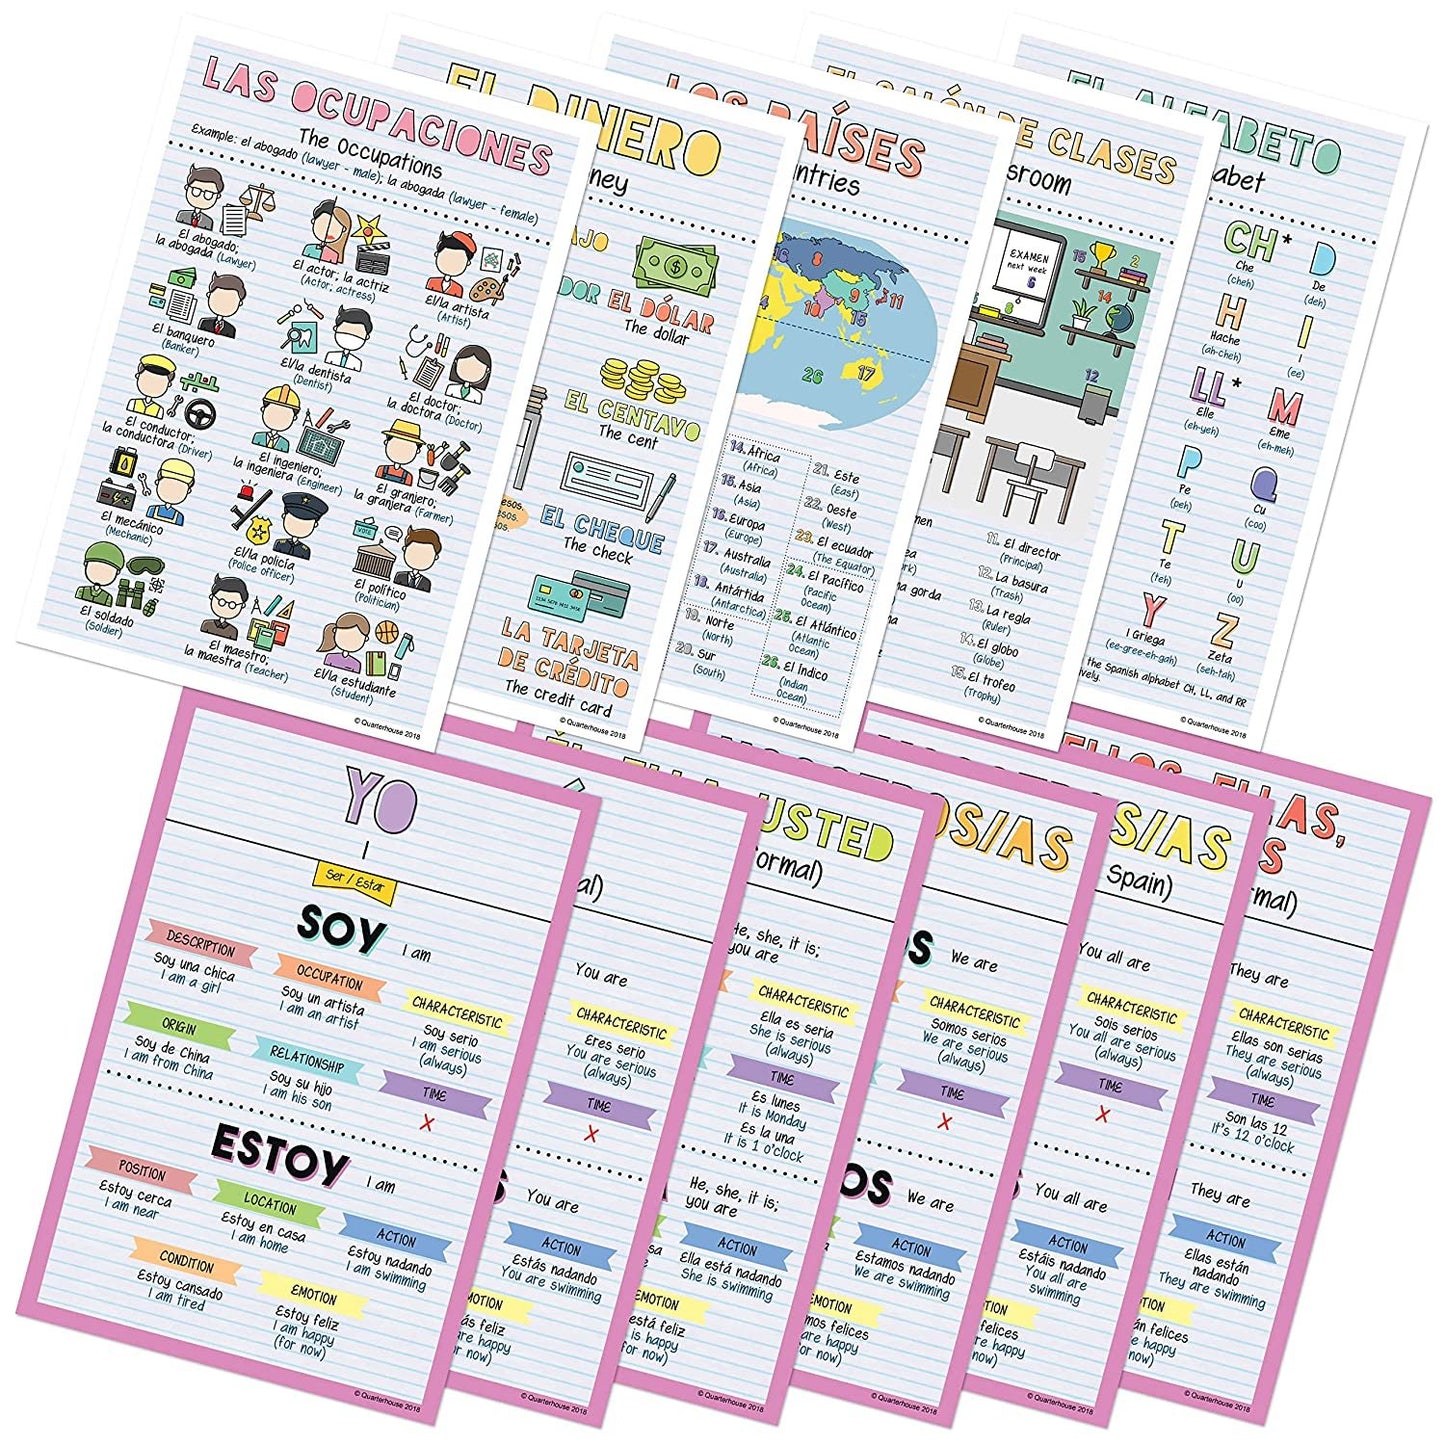 Quarterhouse Spanish Verbs & Beginner Vocabulary (Set D) Poster Set, Spanish Classroom Learning Materials for K-12 Students and Teachers, Set of 11, 12 x 18 Inches, Extra Durable